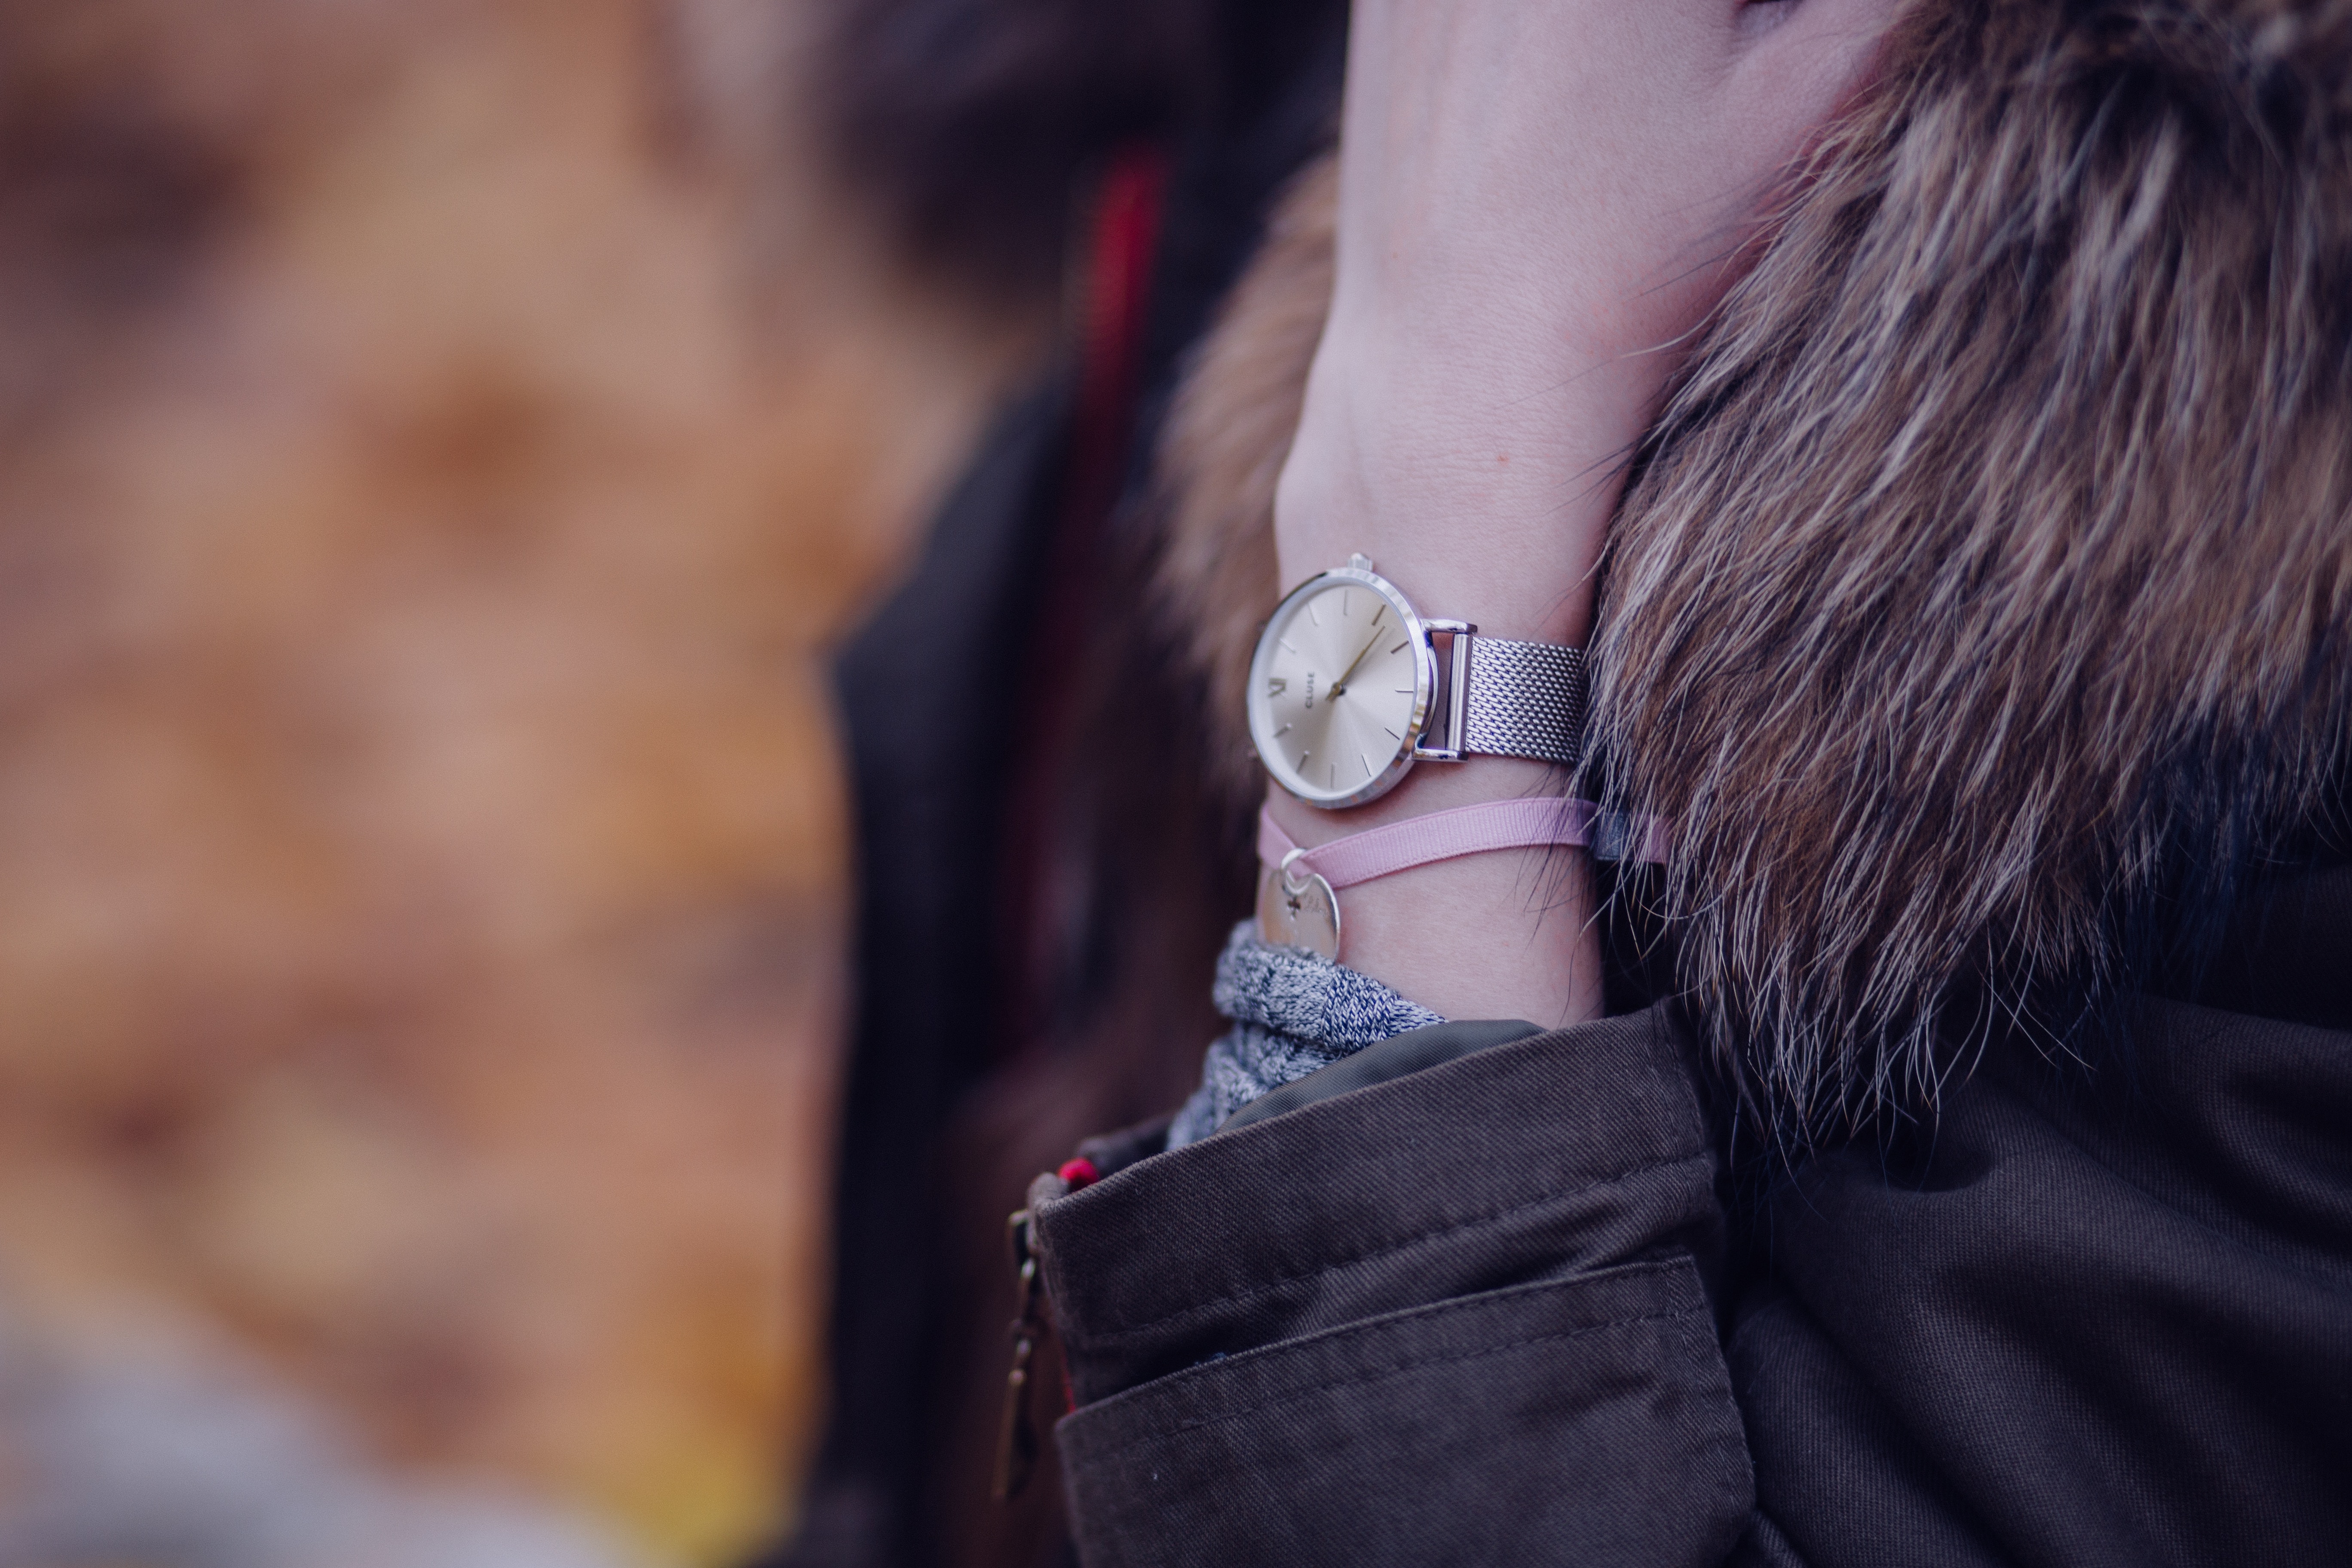 Woman in Brown Parka Jacket With Gold Round Analog Watch, Adult, Blur, Fashion, Fur, HQ Photo